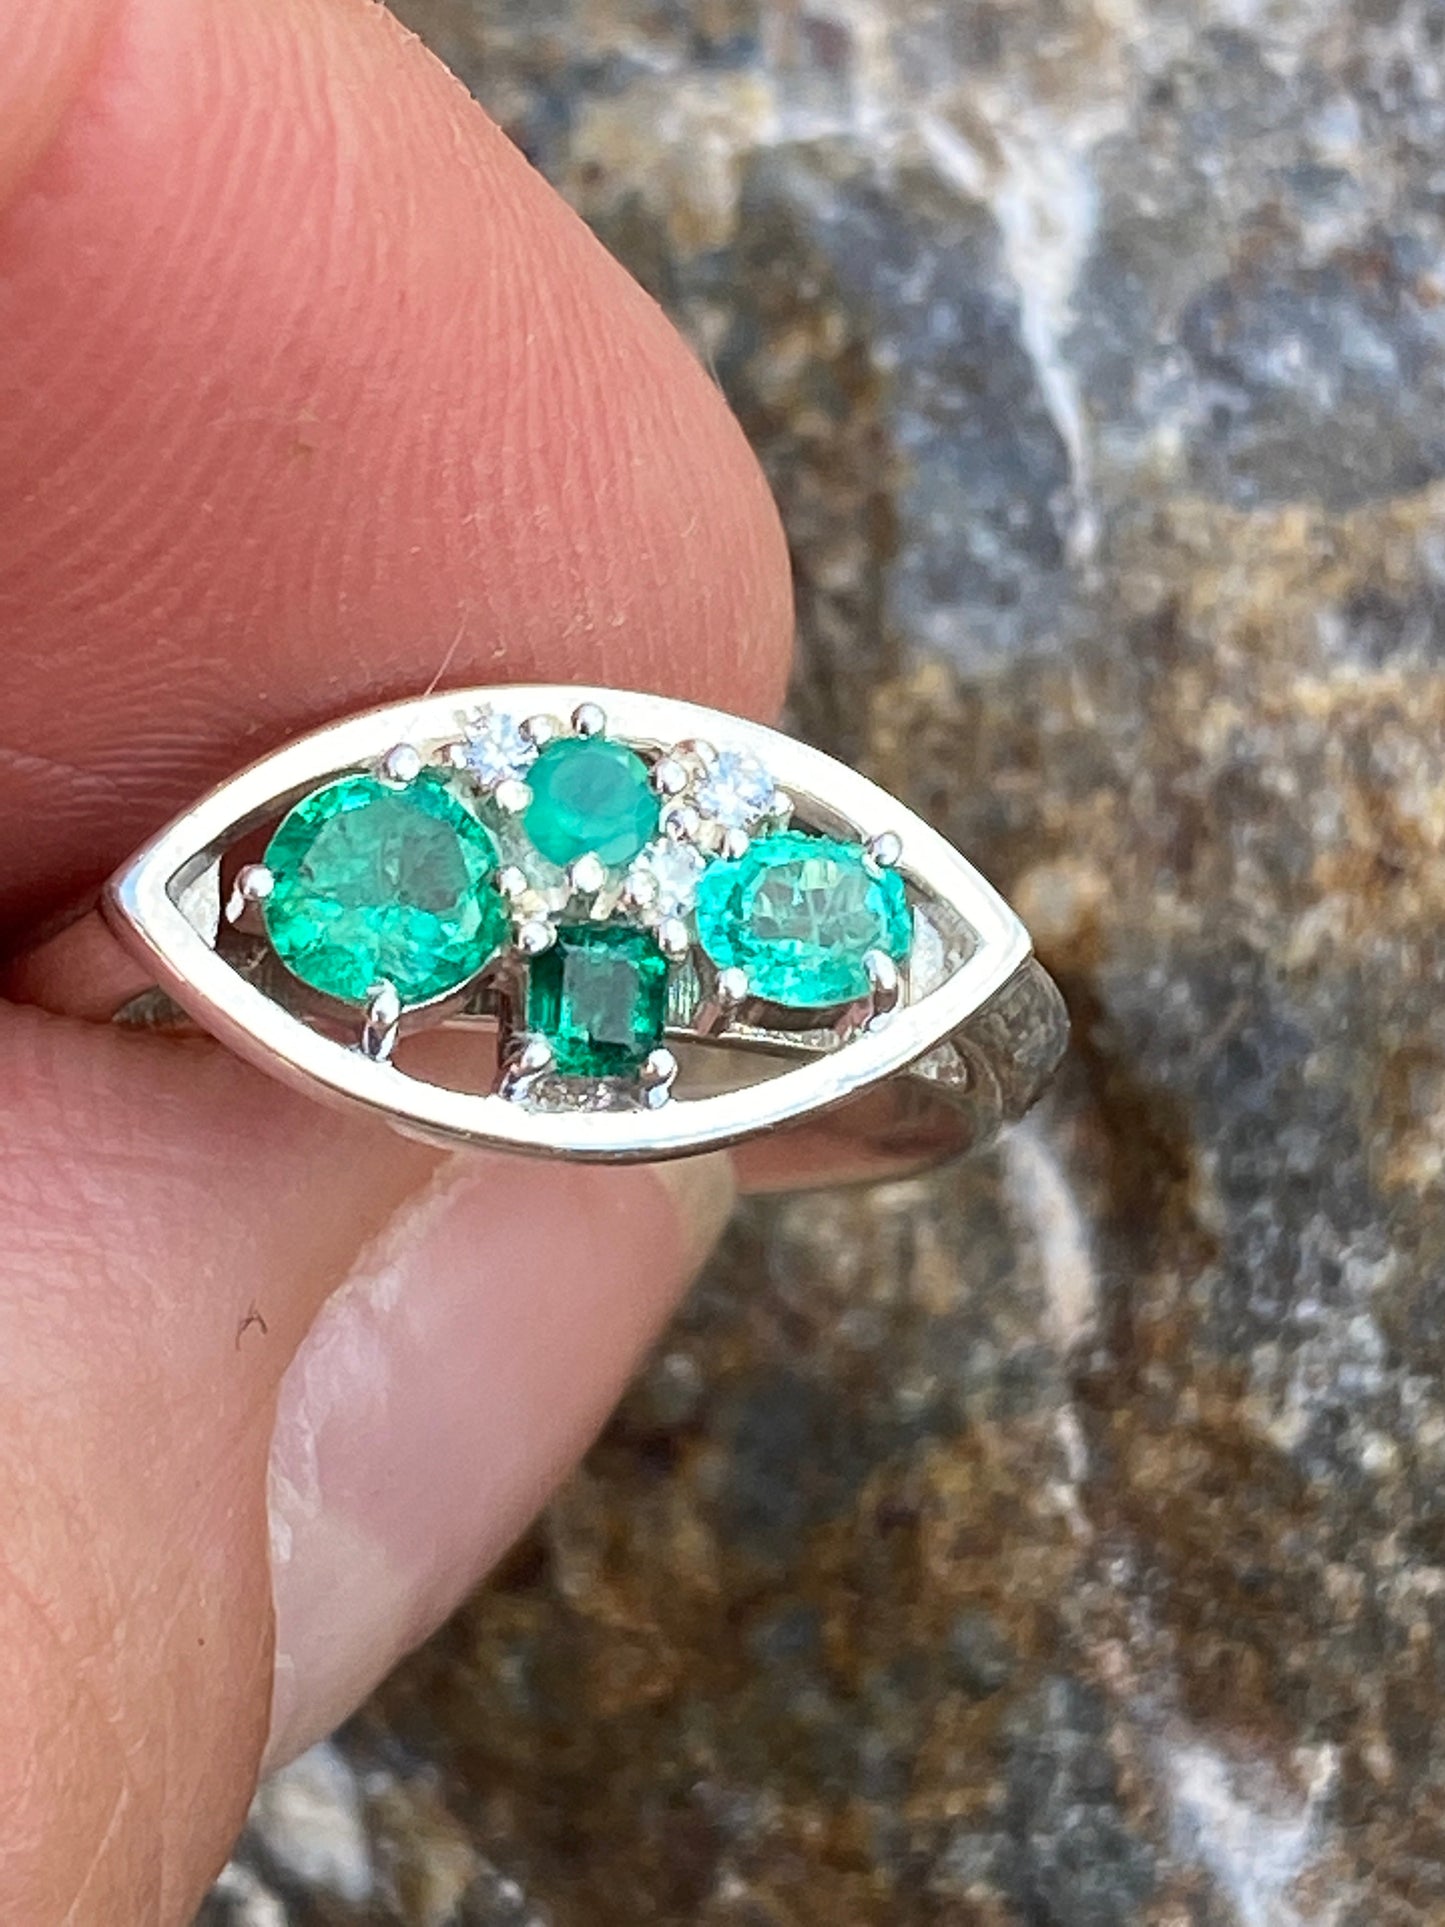 Colombian Emerald Ring in Sterling Silver size 5.5